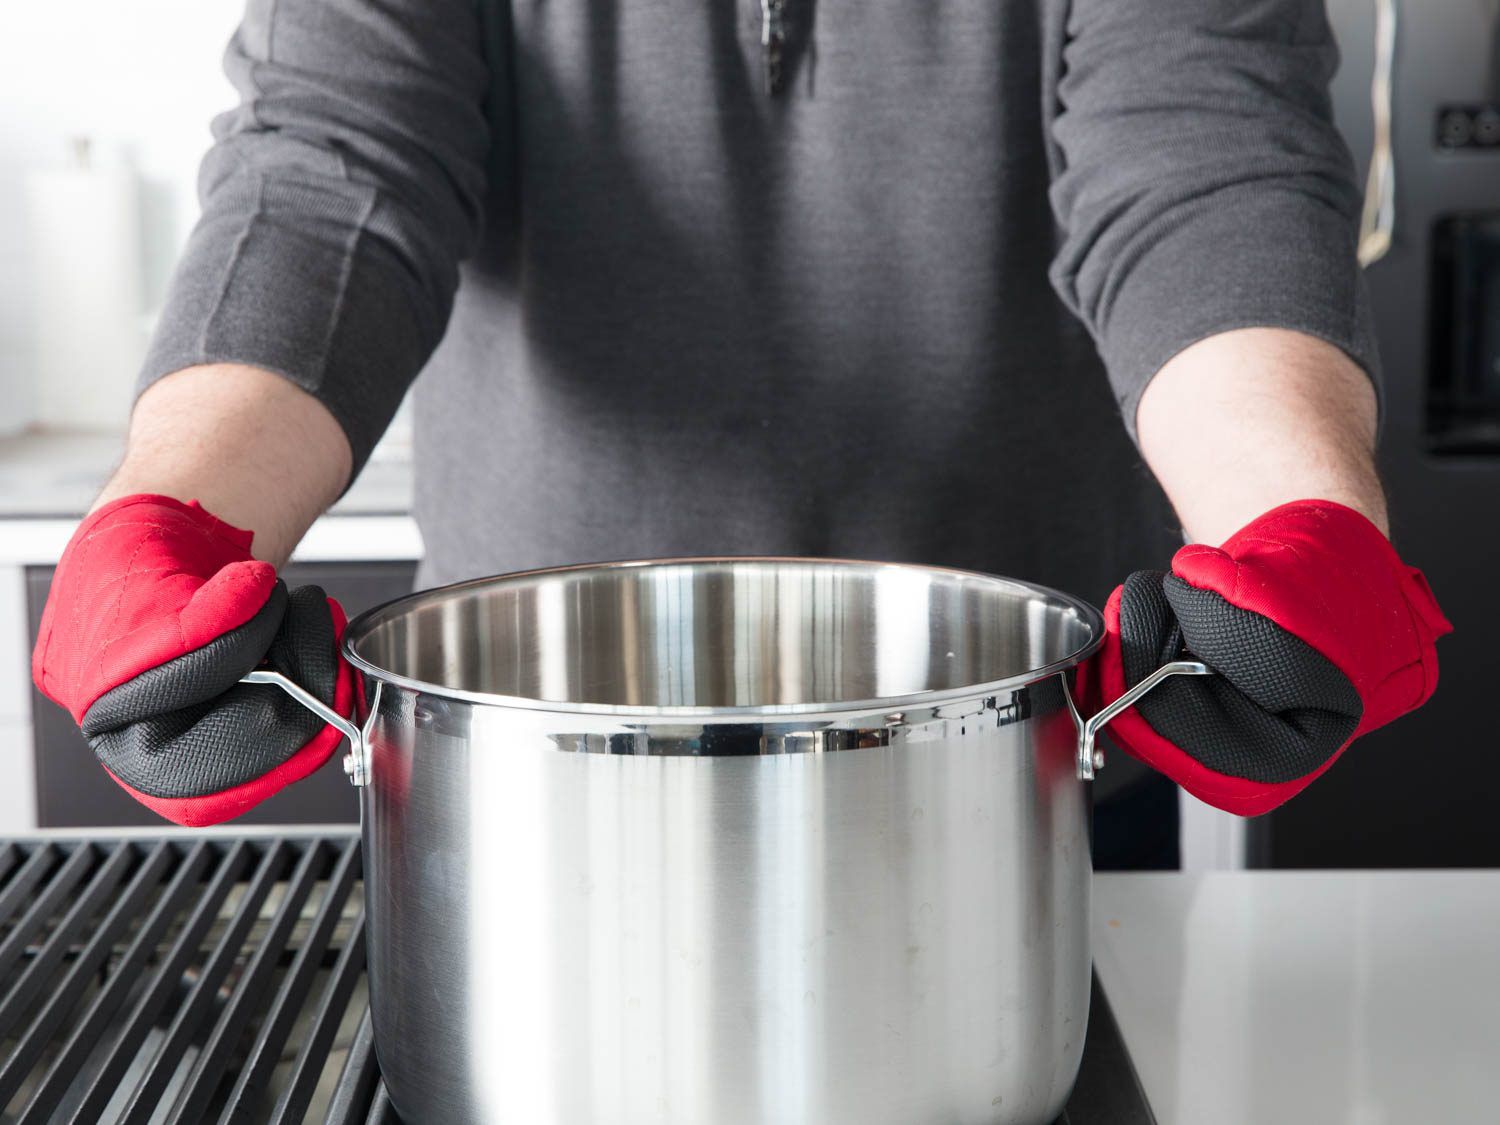 Two hands with oven mitts on gripping the handles of a stockpot